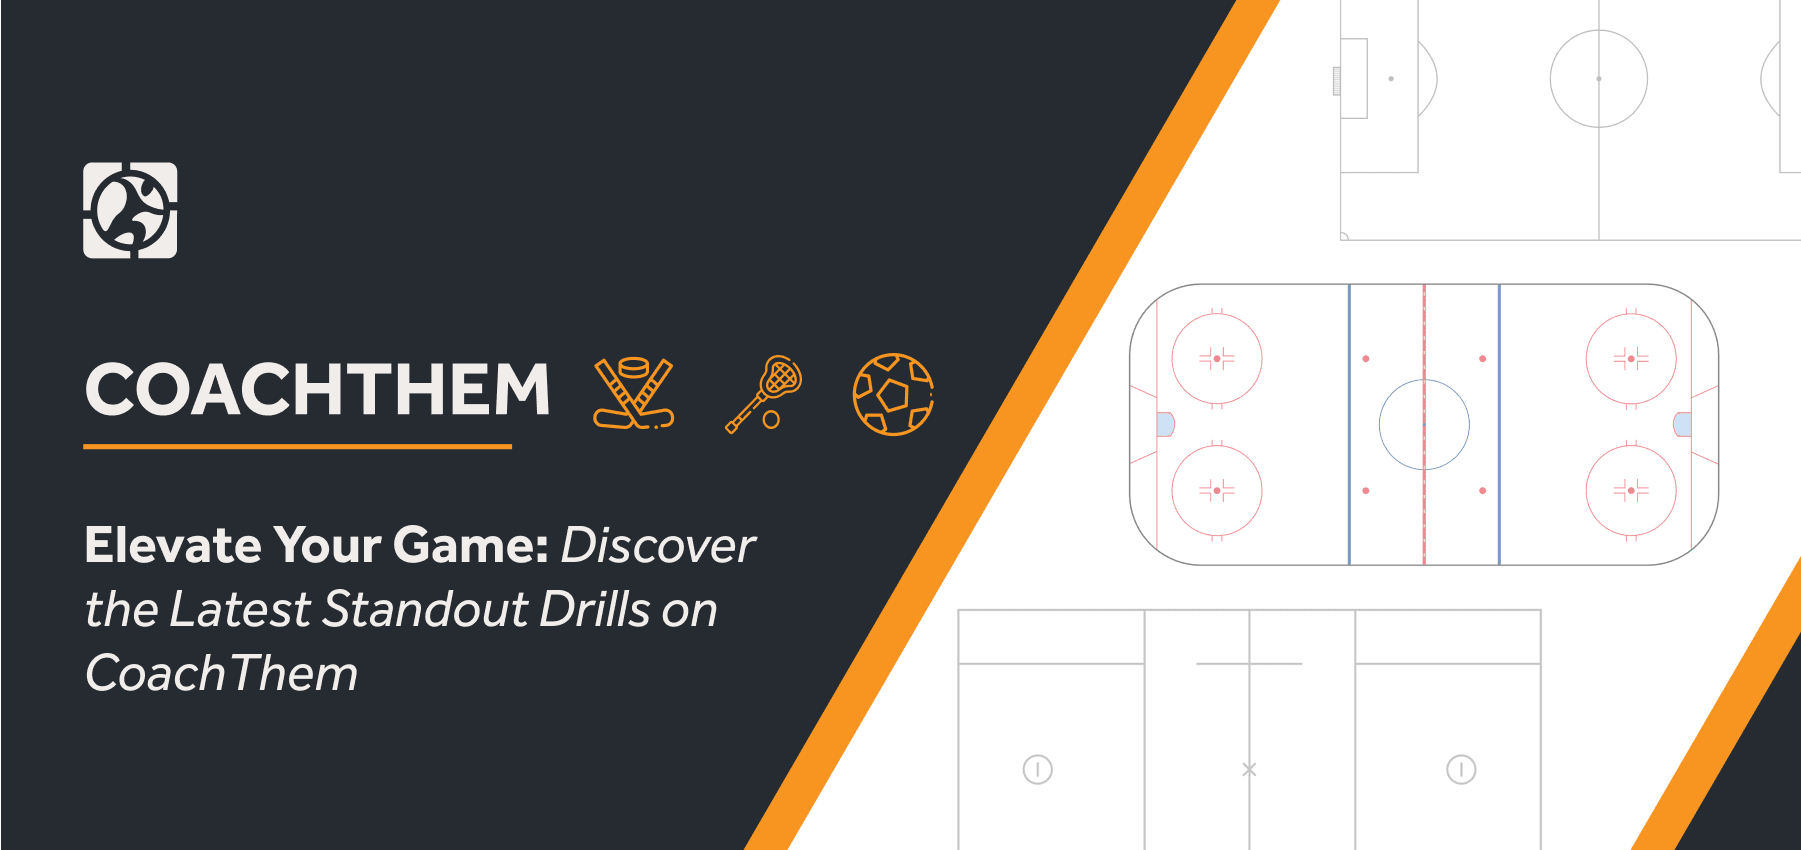 Elevate Your Game: Discover the Latest Standout Drills on CoachThem